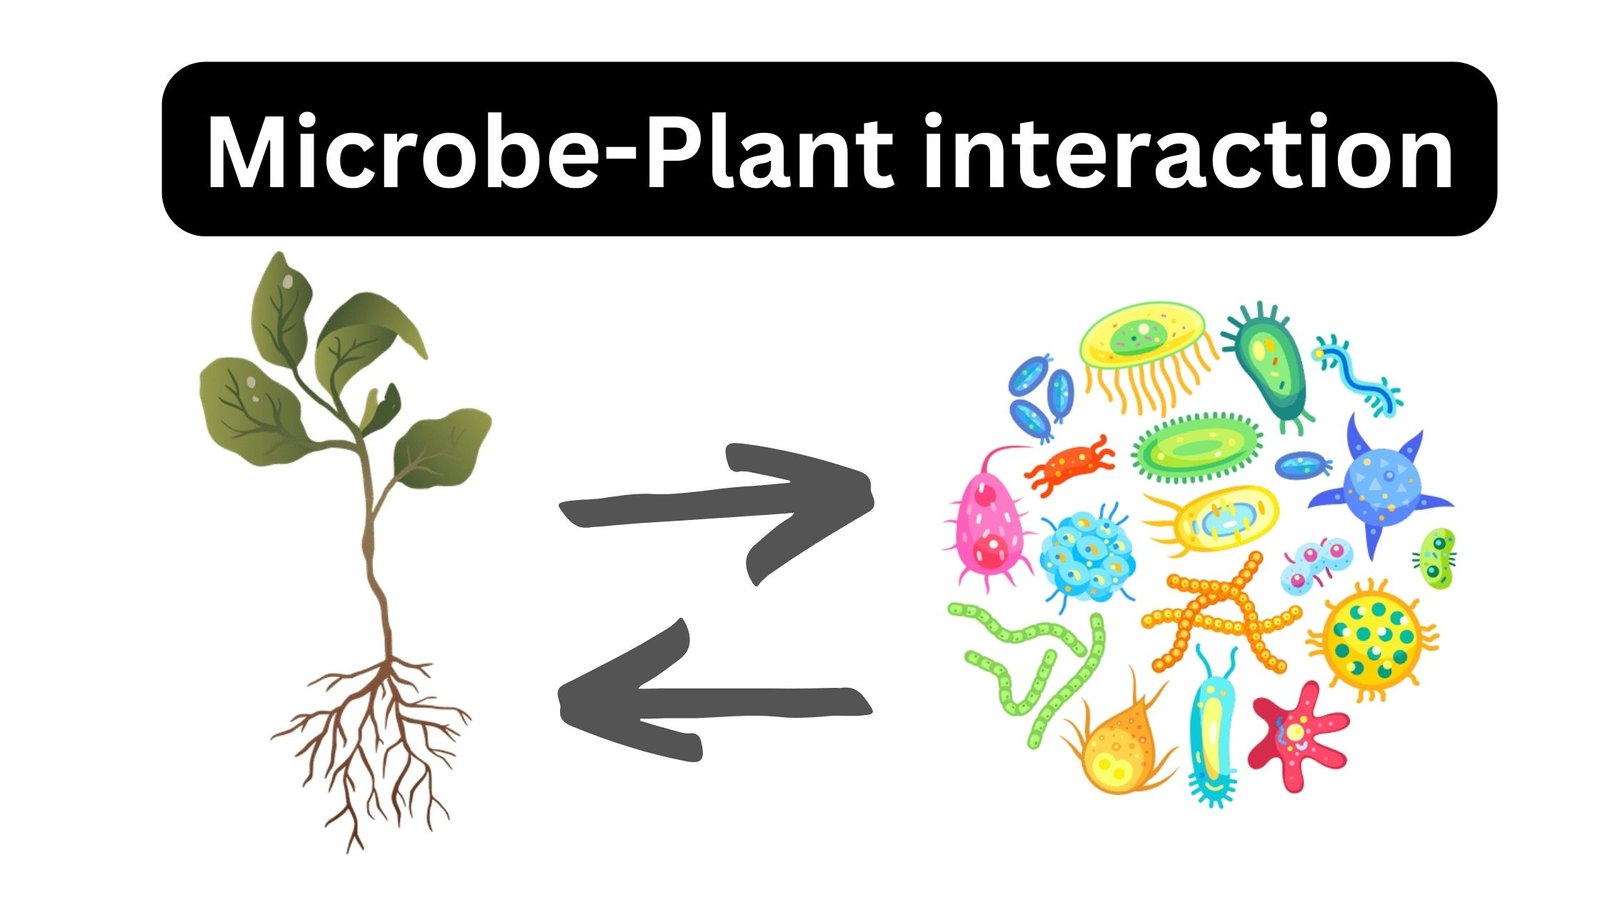 Microbe-Plant interaction - Types, Examples